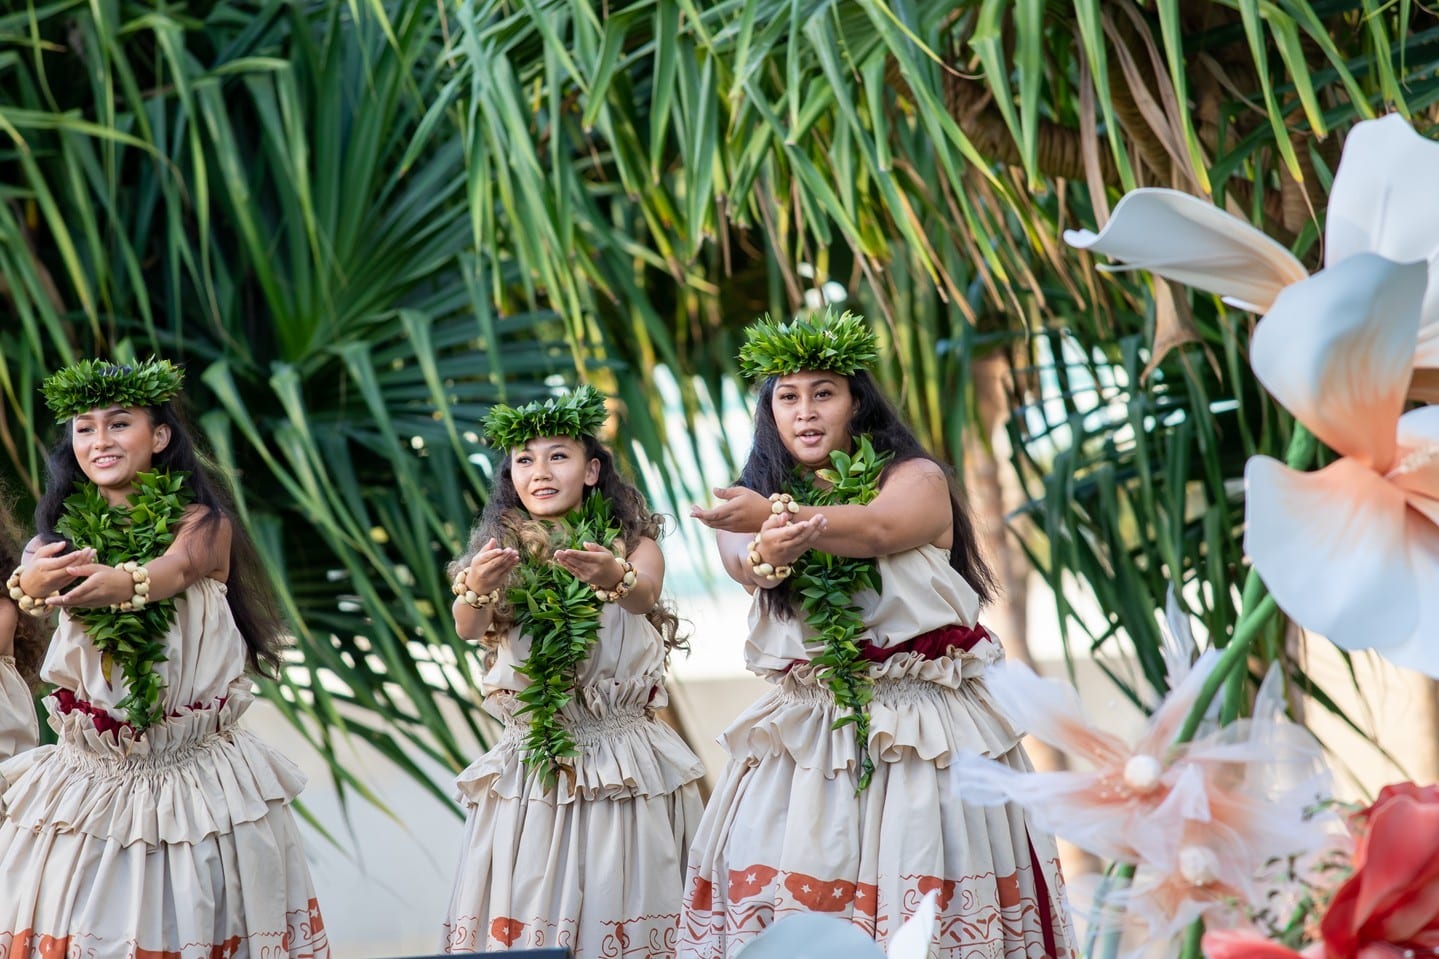 Save the date for our next Kona Nui Nights on October 5 from 6pm-8pm at Victoria Ward Park! Enjoy live music by @the_makaha_sons and a celebration of hula and storytelling by Halau Kawaiʻulaokalā led by Kumu Hula Keliʻihoʻomalu Puchalski. Click the link in our bio to learn more. #hawaii #hula #wardvillage